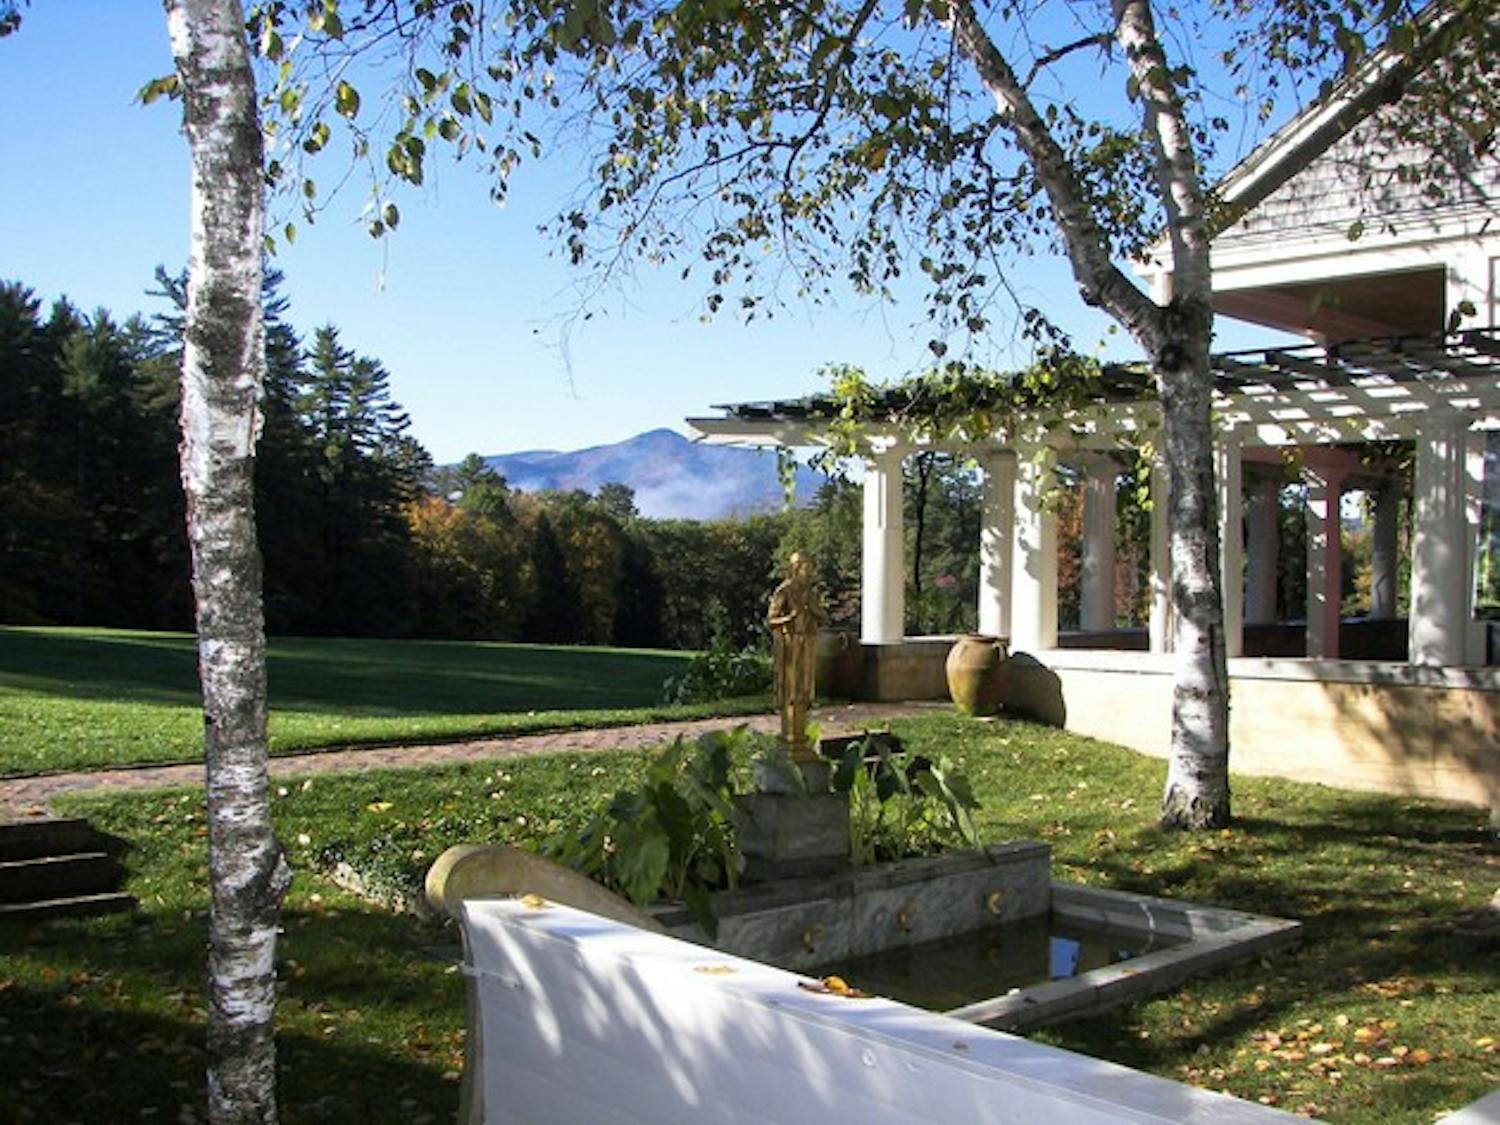 Visitors to Saint-Gaudens' home can enjoy historic and modern art in the outdoors.